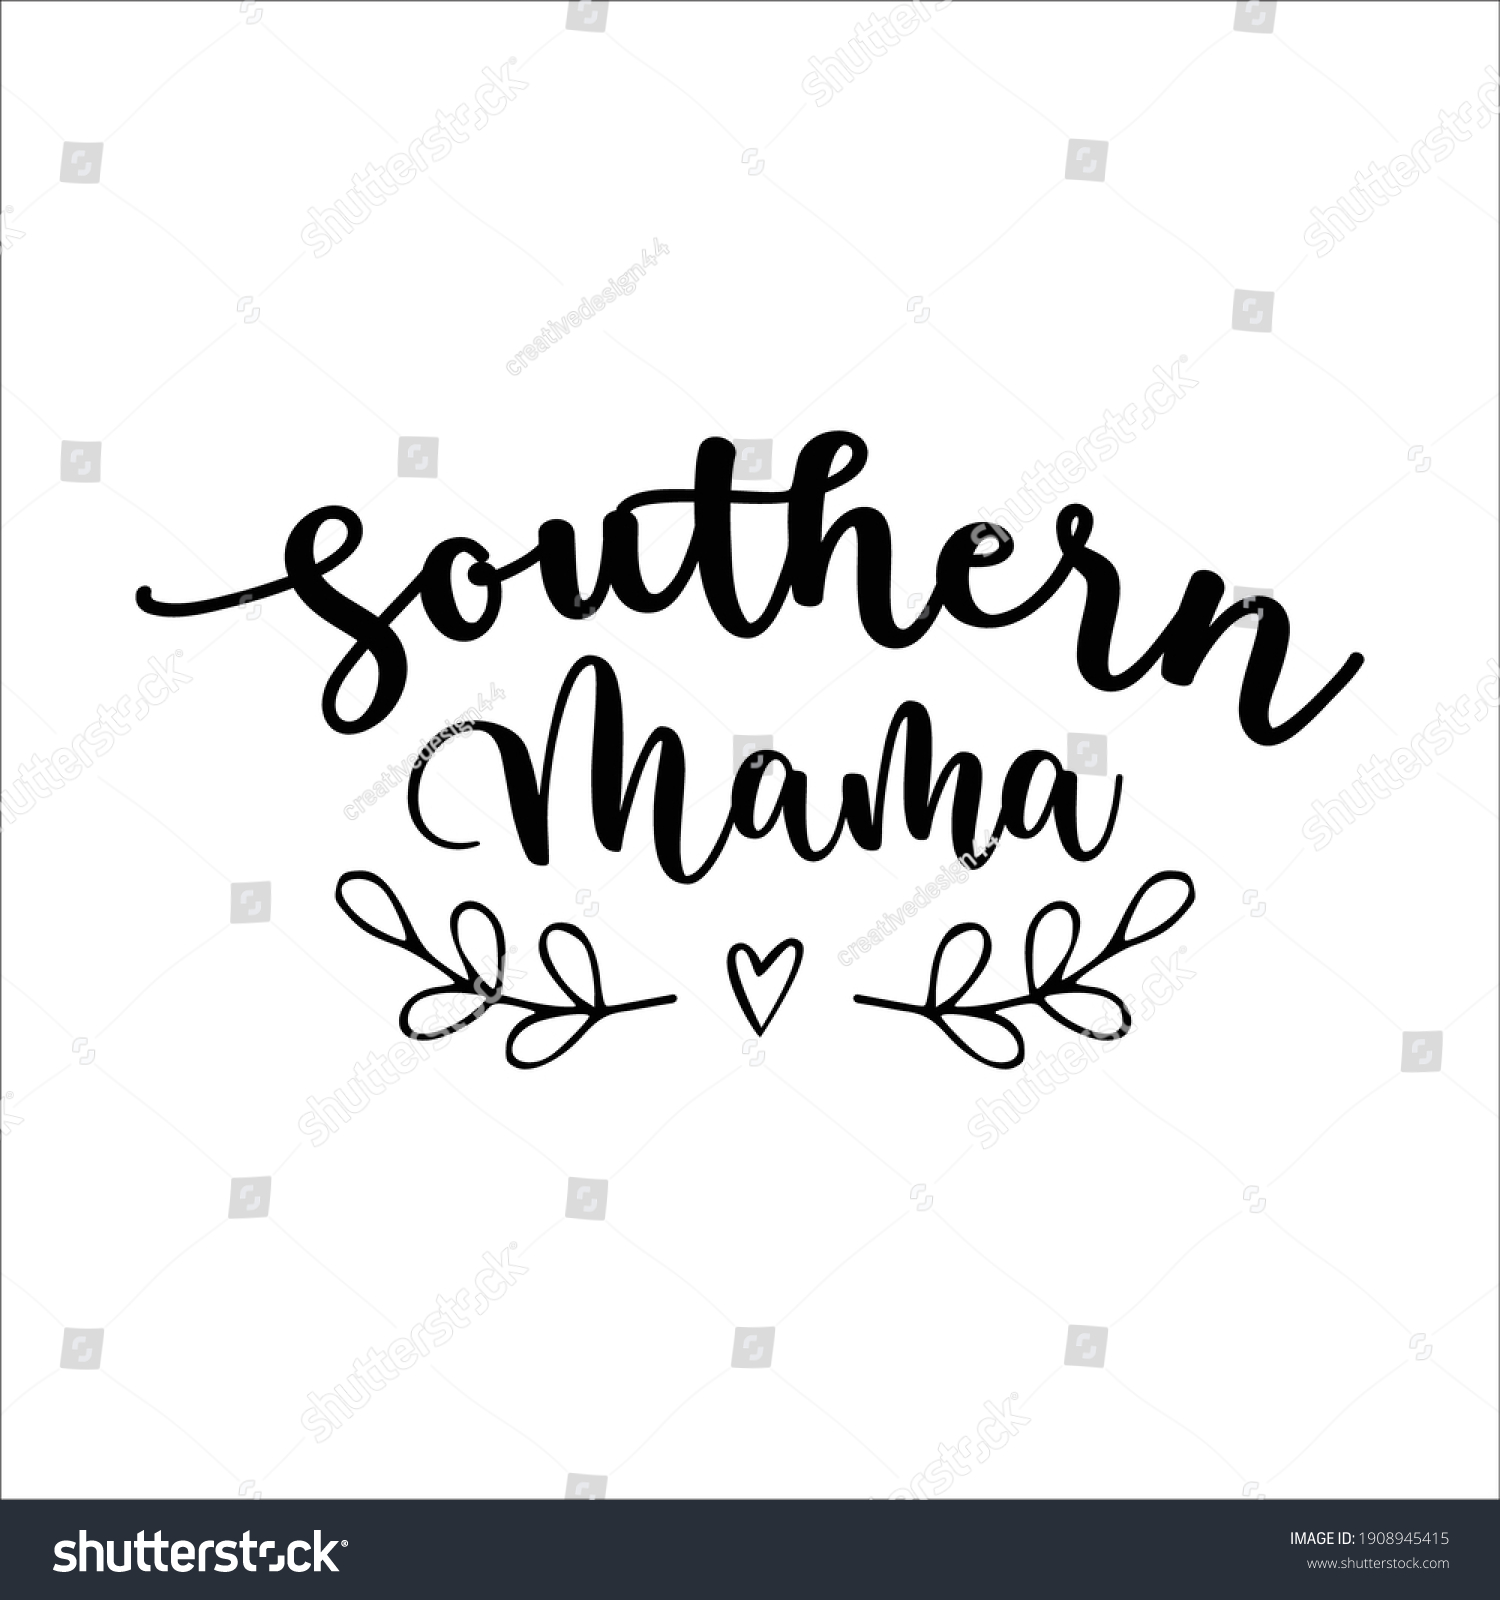 SVG of Southern mama - Southern Girl Quotes Svg lettering design svg